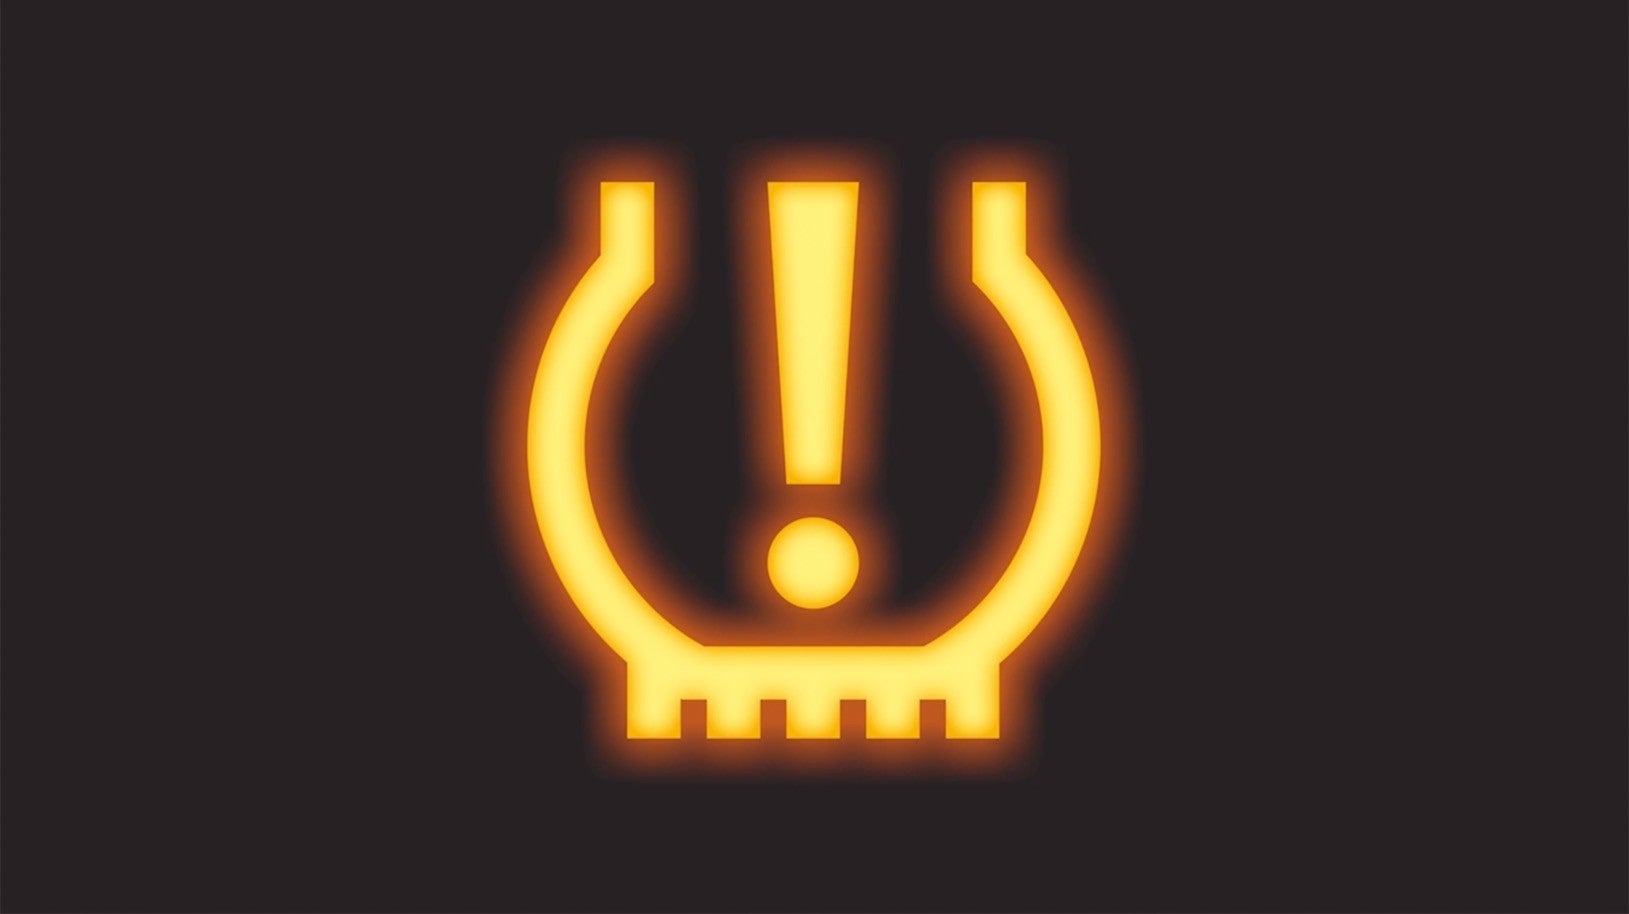  Image of the Tire Pressure Monitoring System Light | Thelen Subaru in Bay City MI